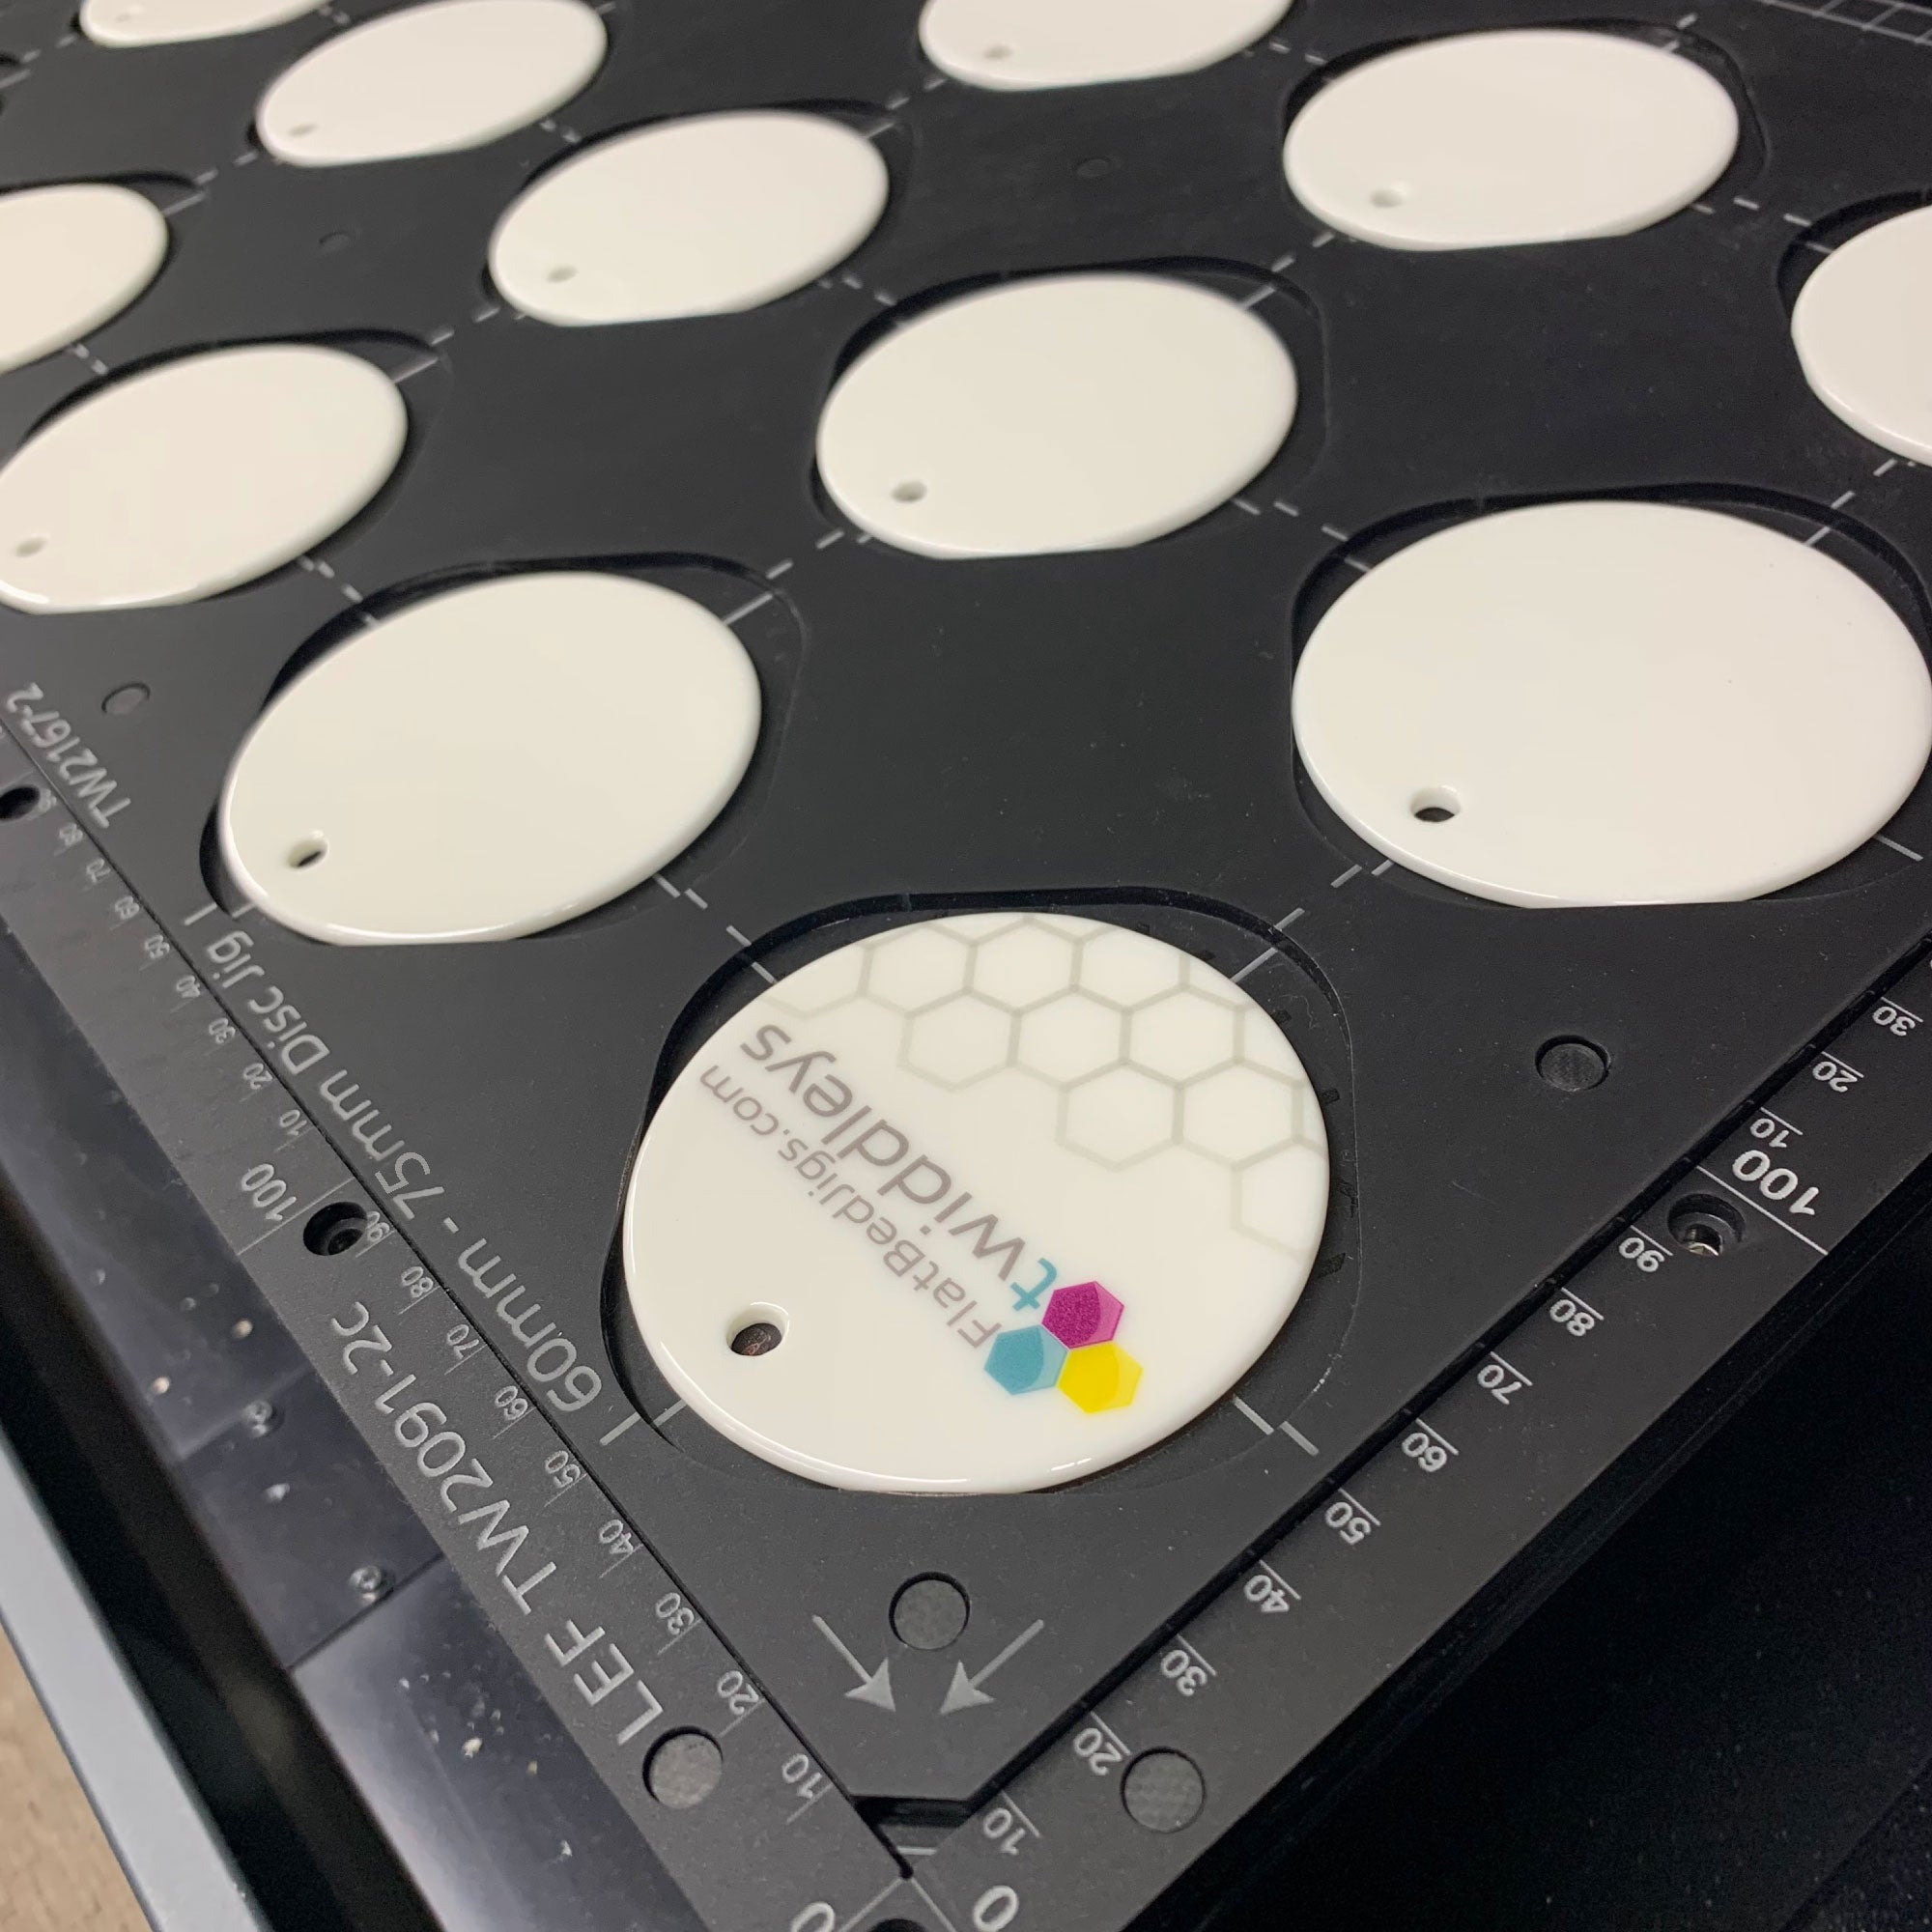 Ceramic Christmas Bauble Printing Jig for Roland LEF 200 / SF 20 Flatbed Printer Series - 60mm - 77mm Circular Discs (15 Spaces)